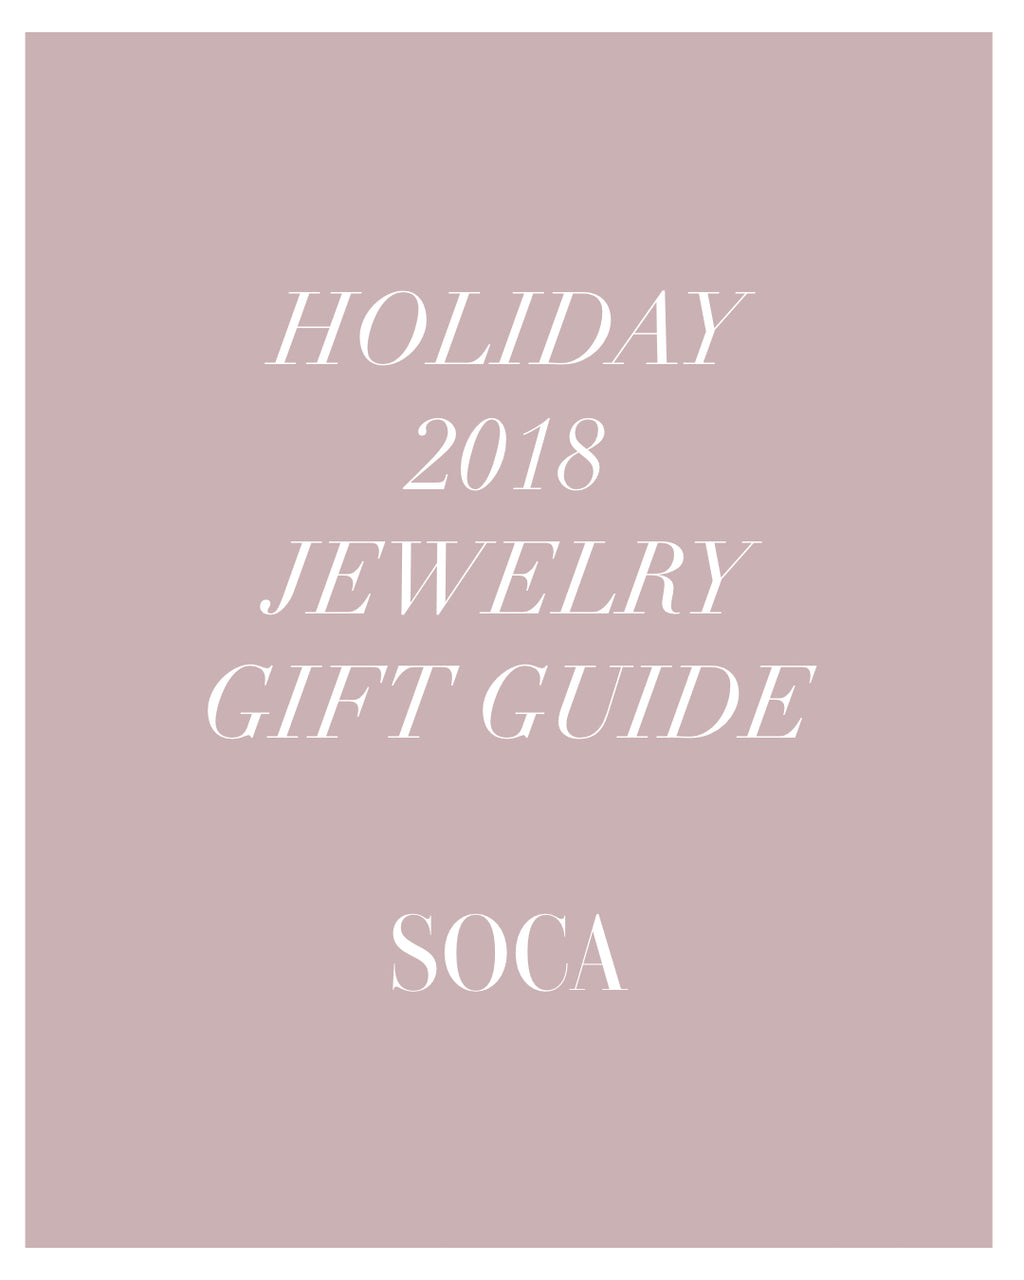 Soca Clothing Holiday Jewelry Gift Guide 2018